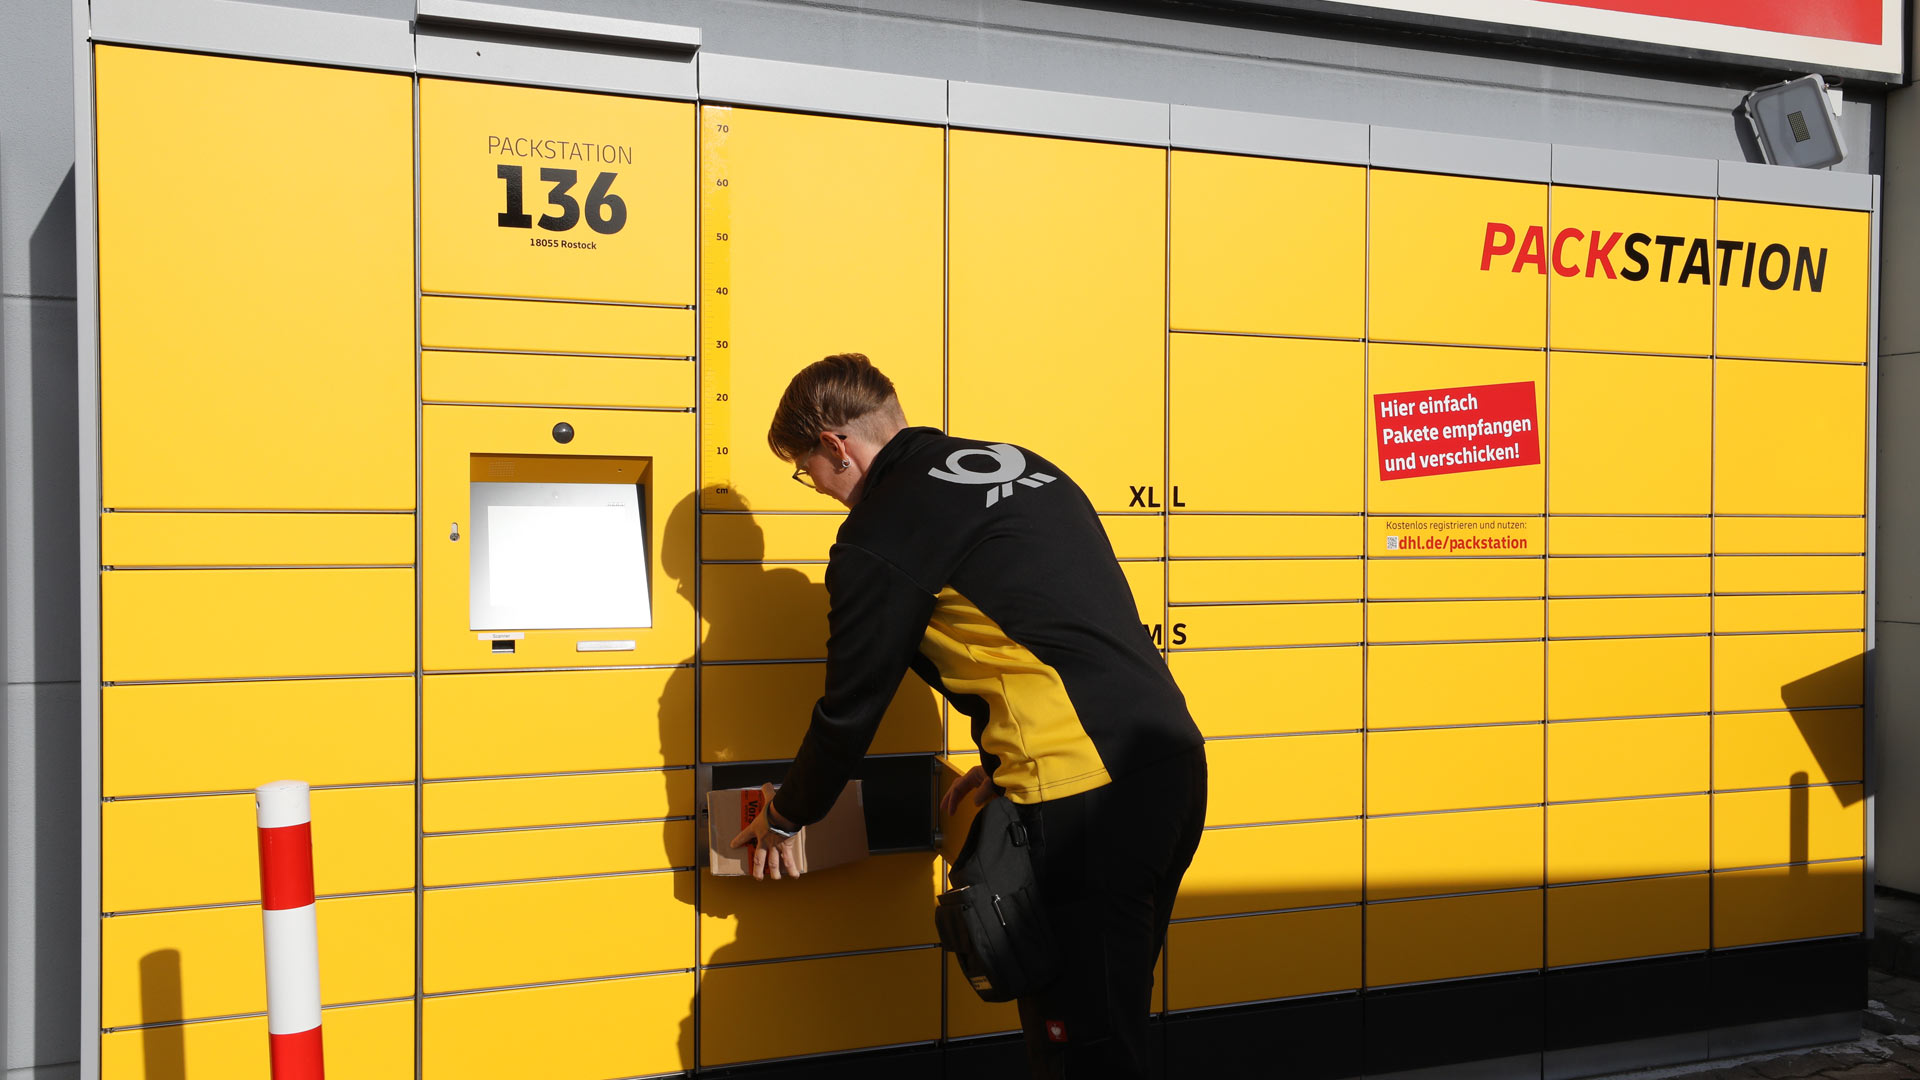 DHL Packstation  | picture alliance/dpa/dpa-Zentral